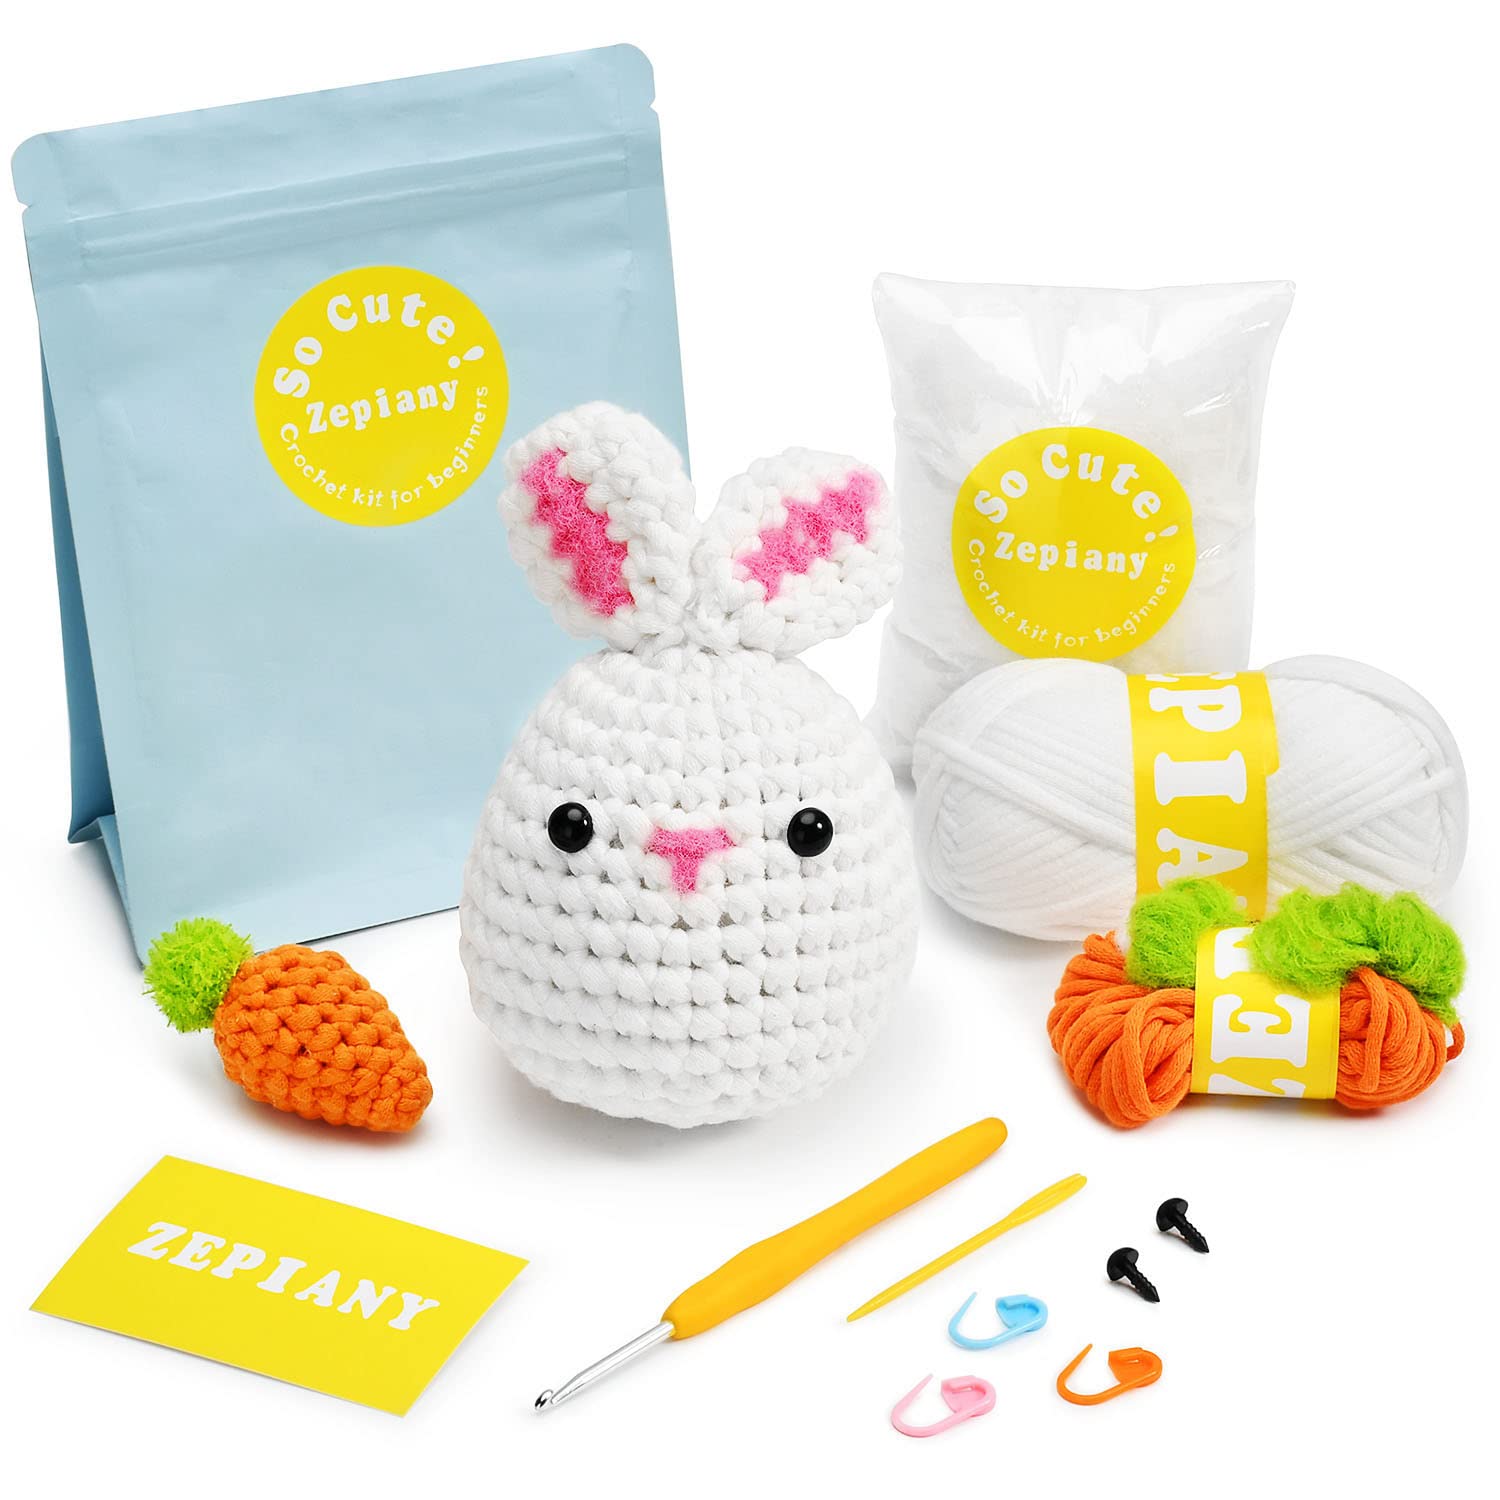 Crochet Kit for Beginners, Complete DIY Animals for Adults and